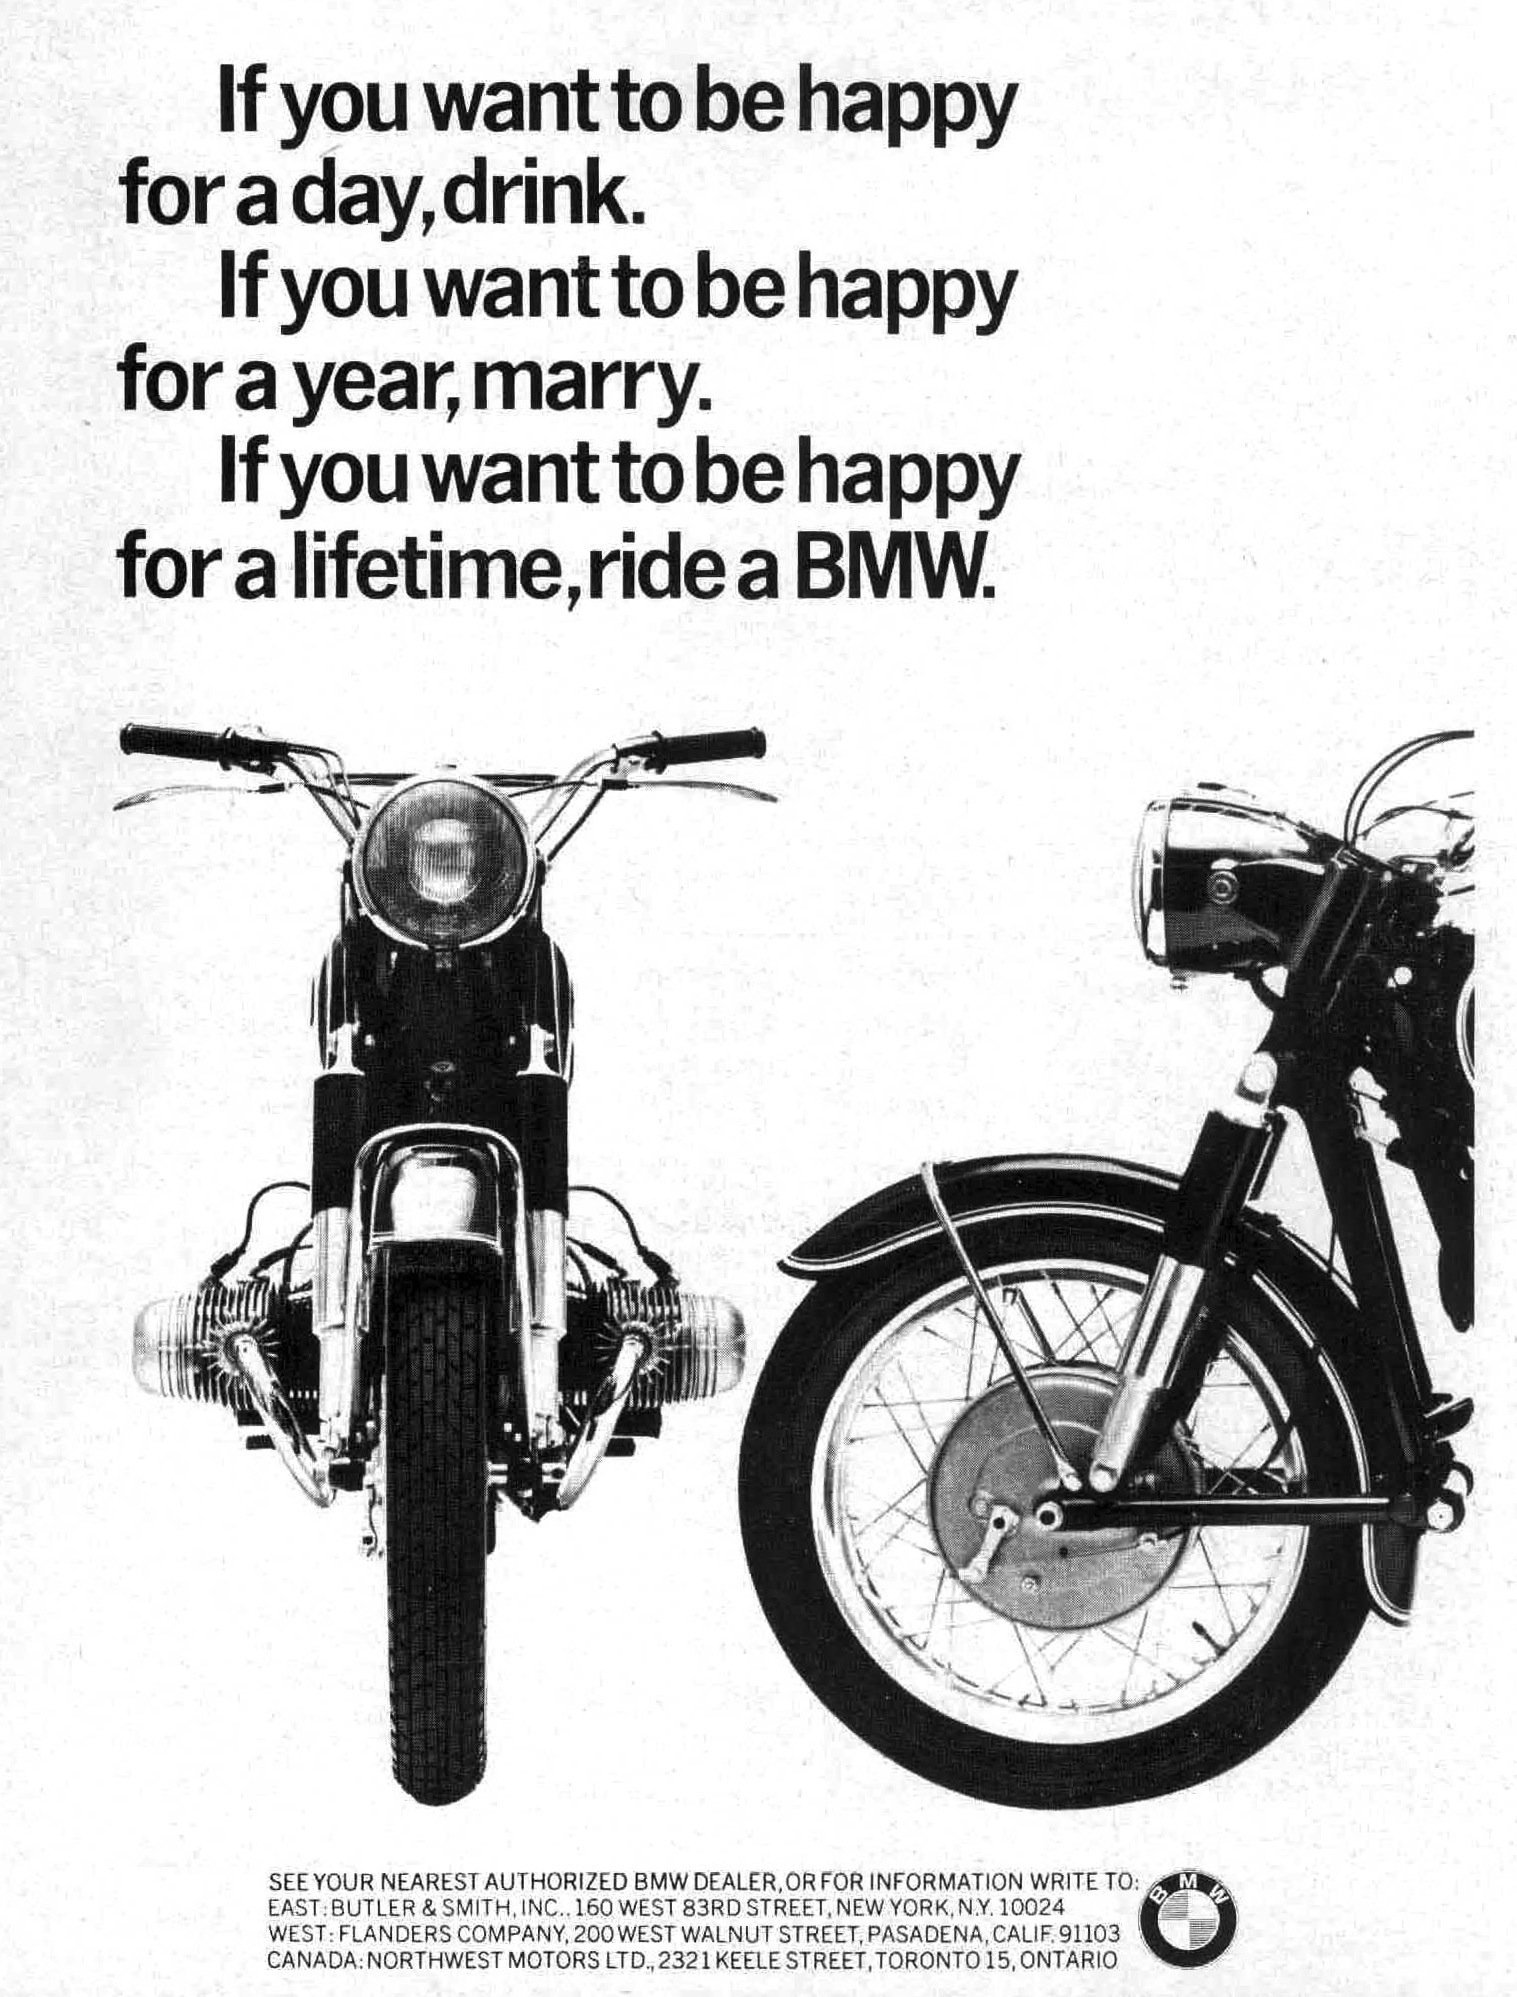 A-Brief-History-of-the-BMW-R80-GS-24.jpg